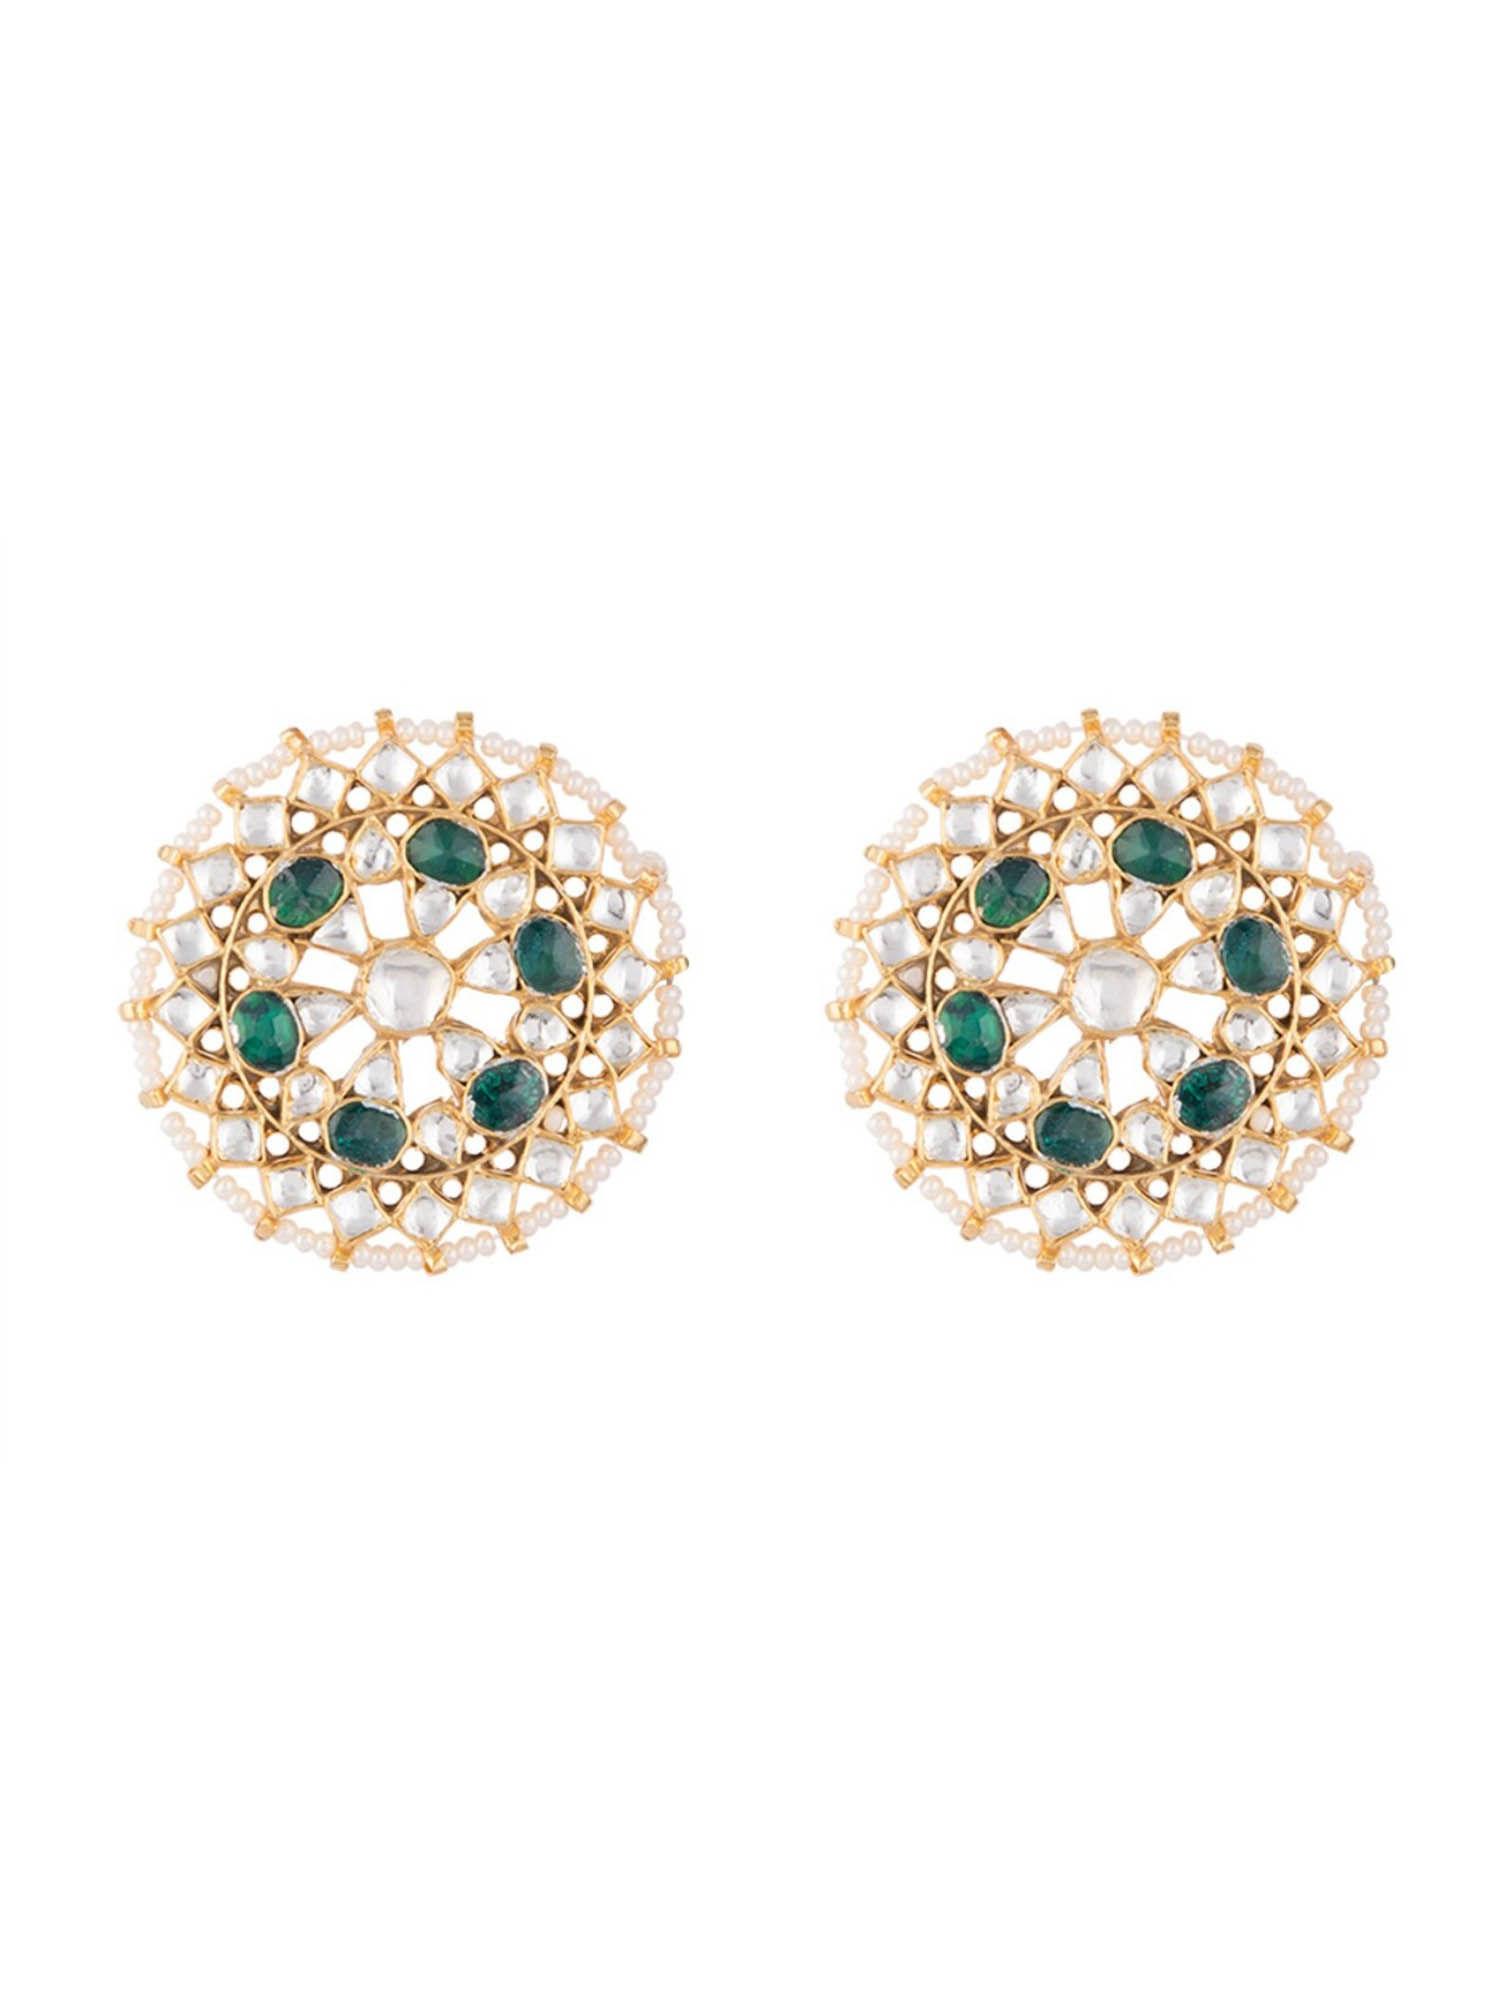 round stud earrings with green and white stones with beaded with pearl